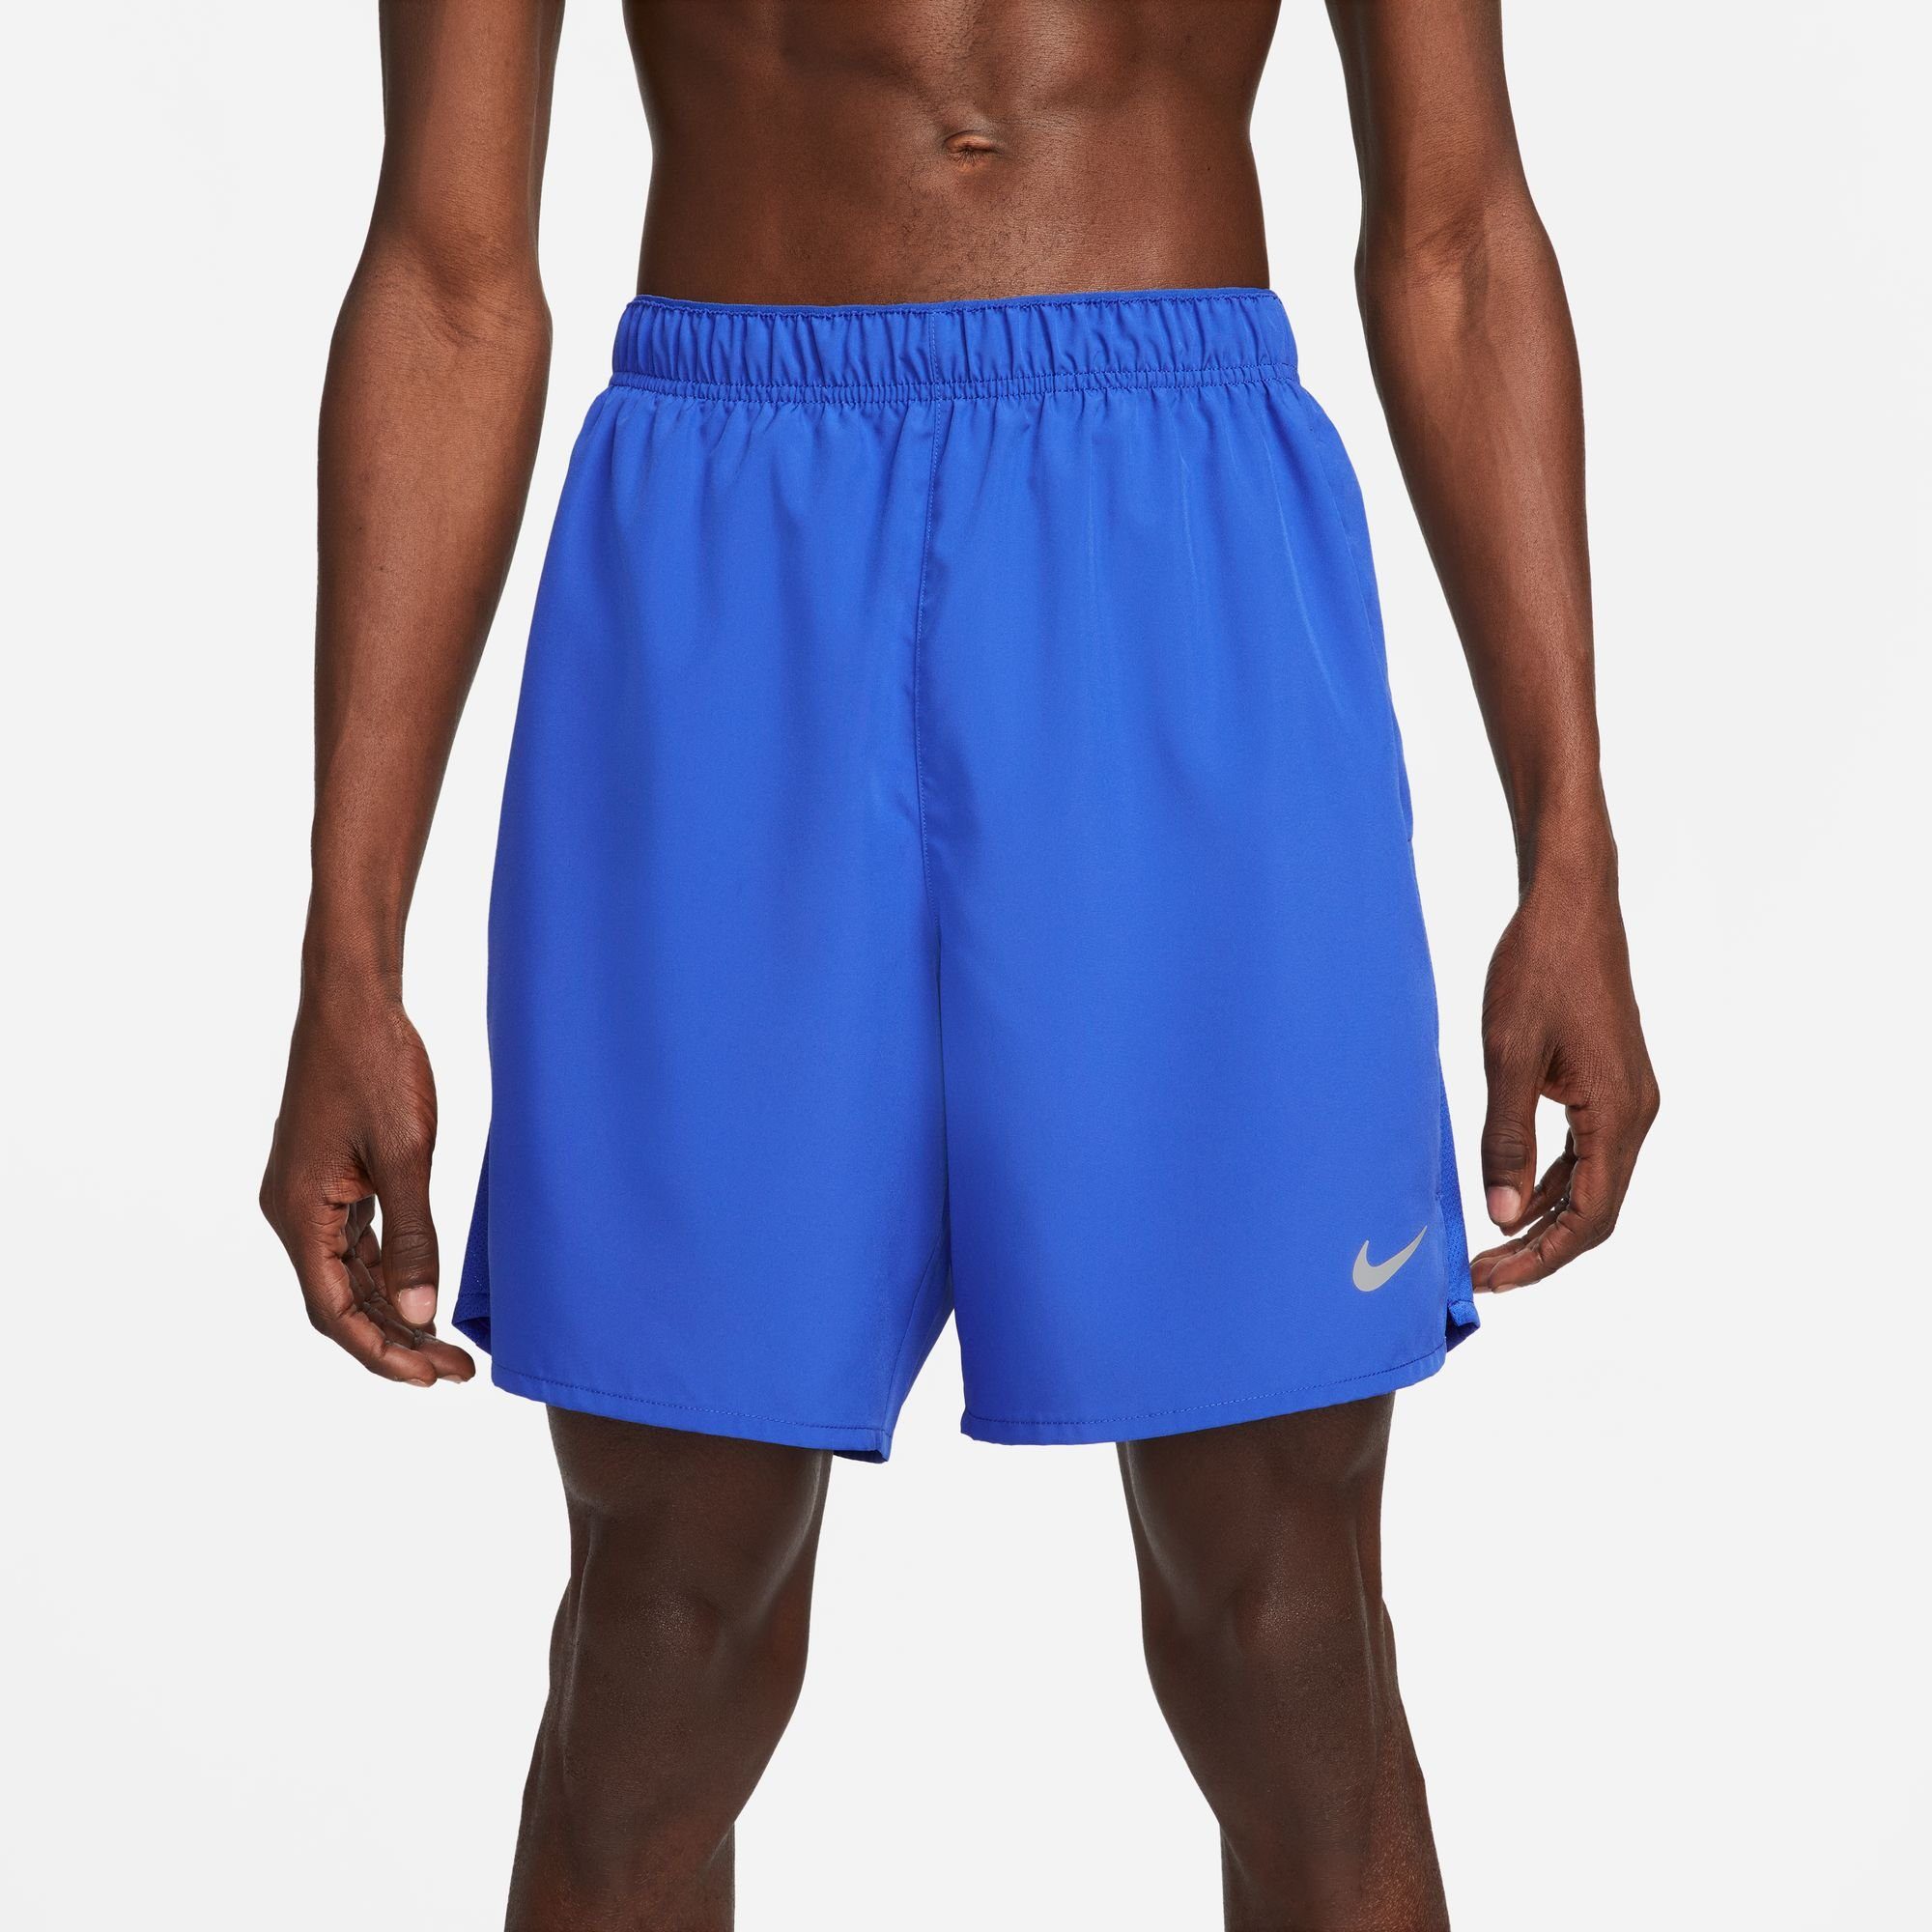 DRI-FIT GAME MEN'S UNLINED SILV ROYAL/REFLECTIVE Laufshorts RUNNING CHALLENGER ROYAL/GAME Nike SHORTS